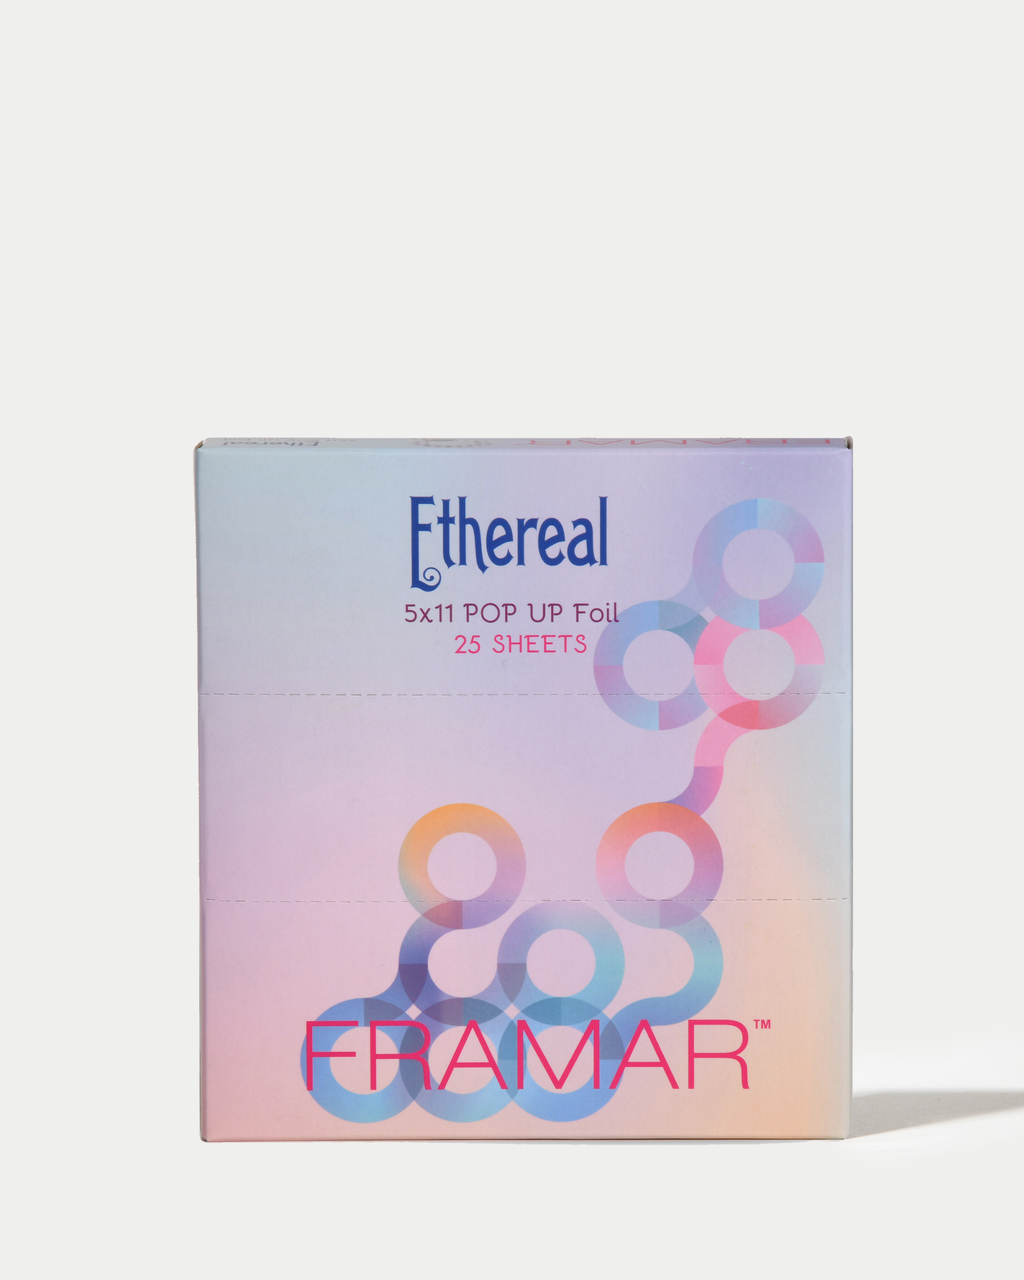 Ethereal Pop Up - Sample